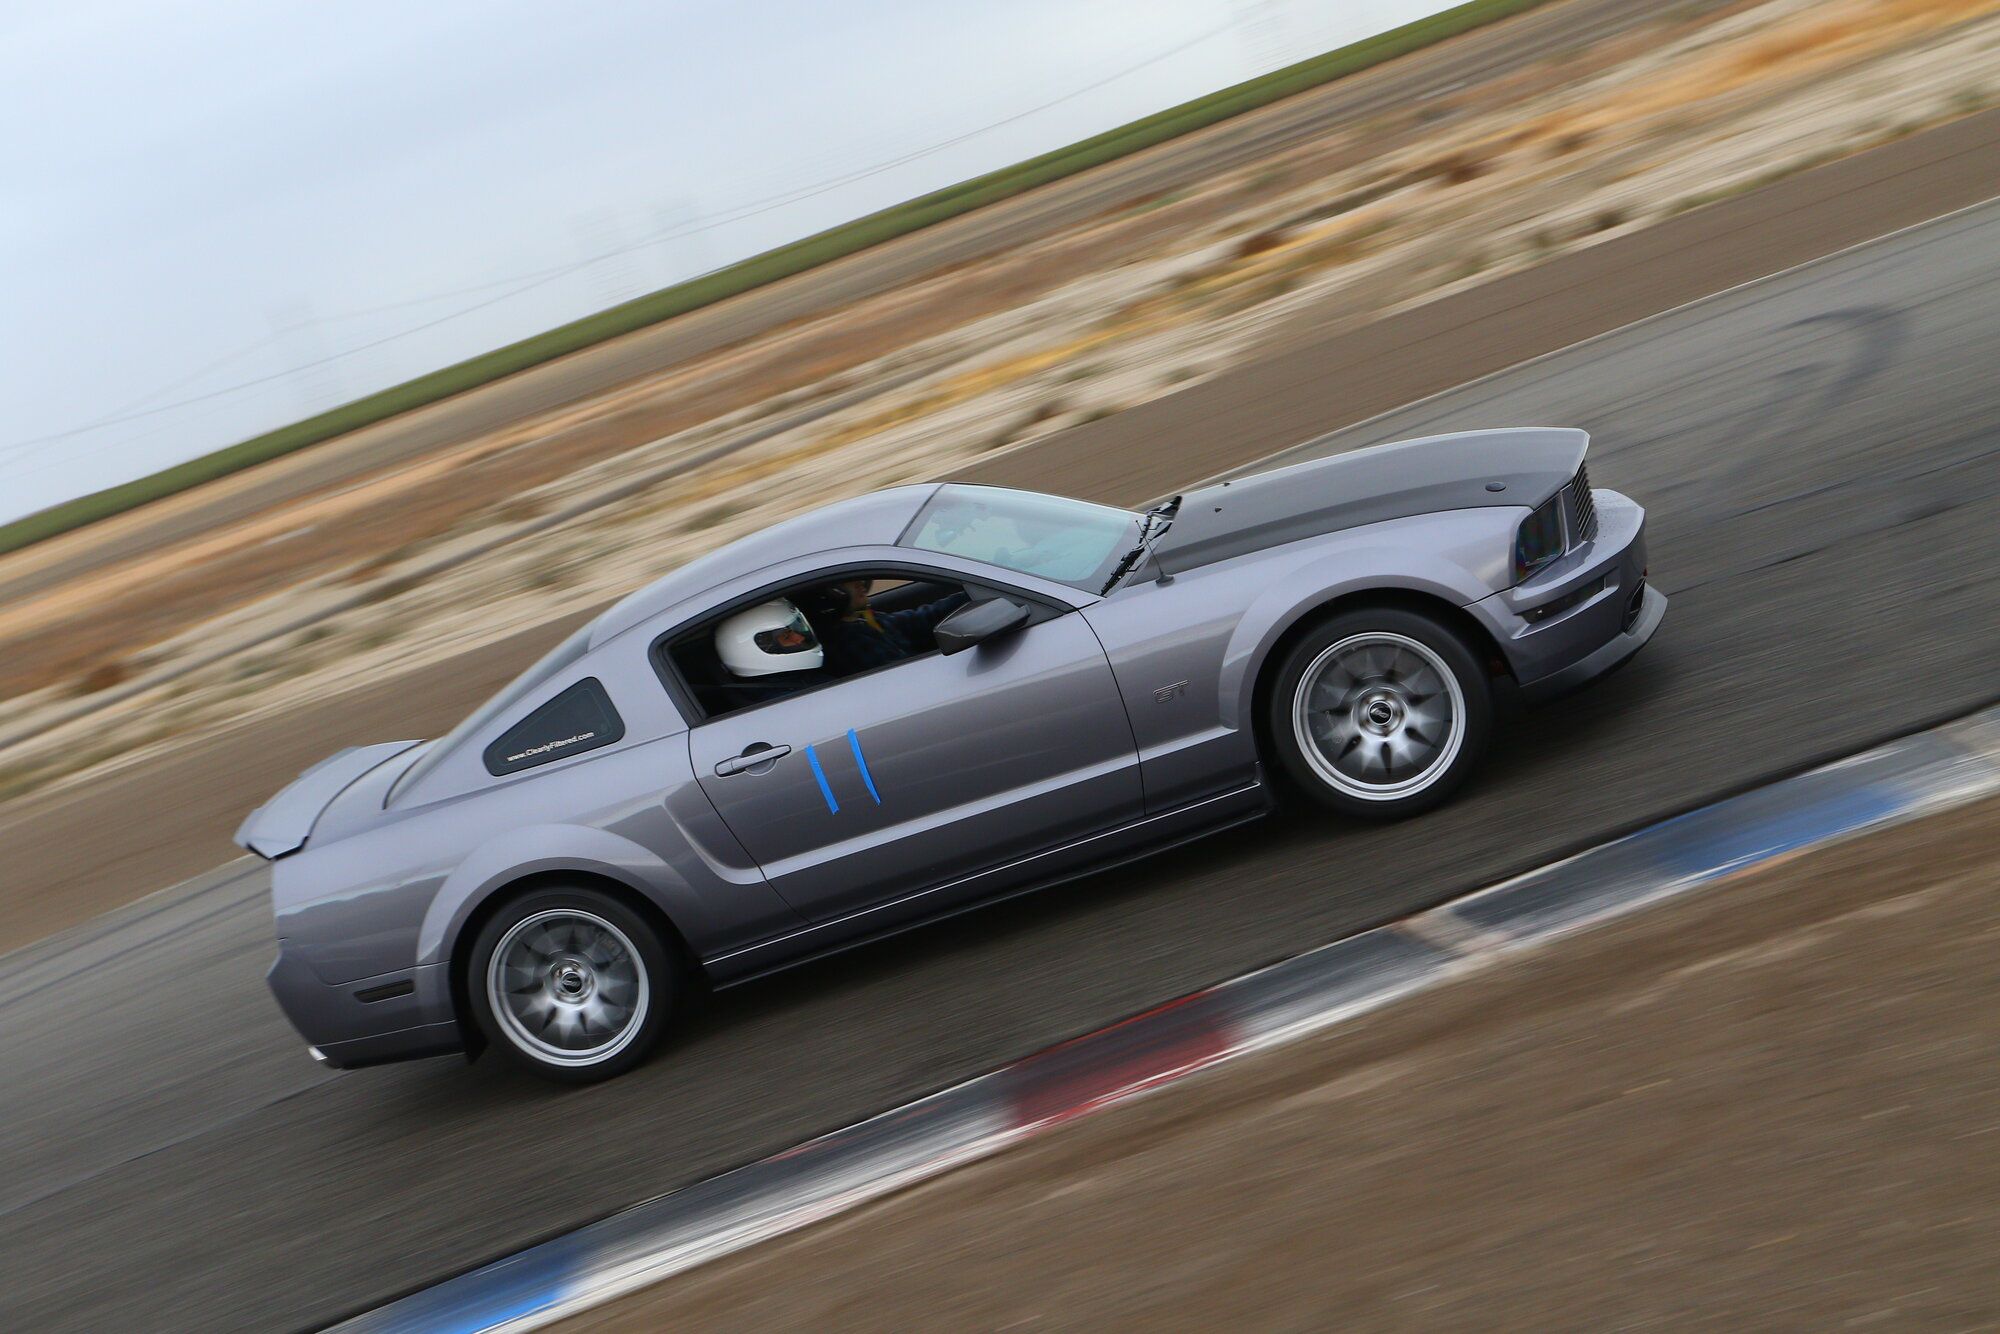 2006 Mustang
GT_46L  (Modified '06 GT)